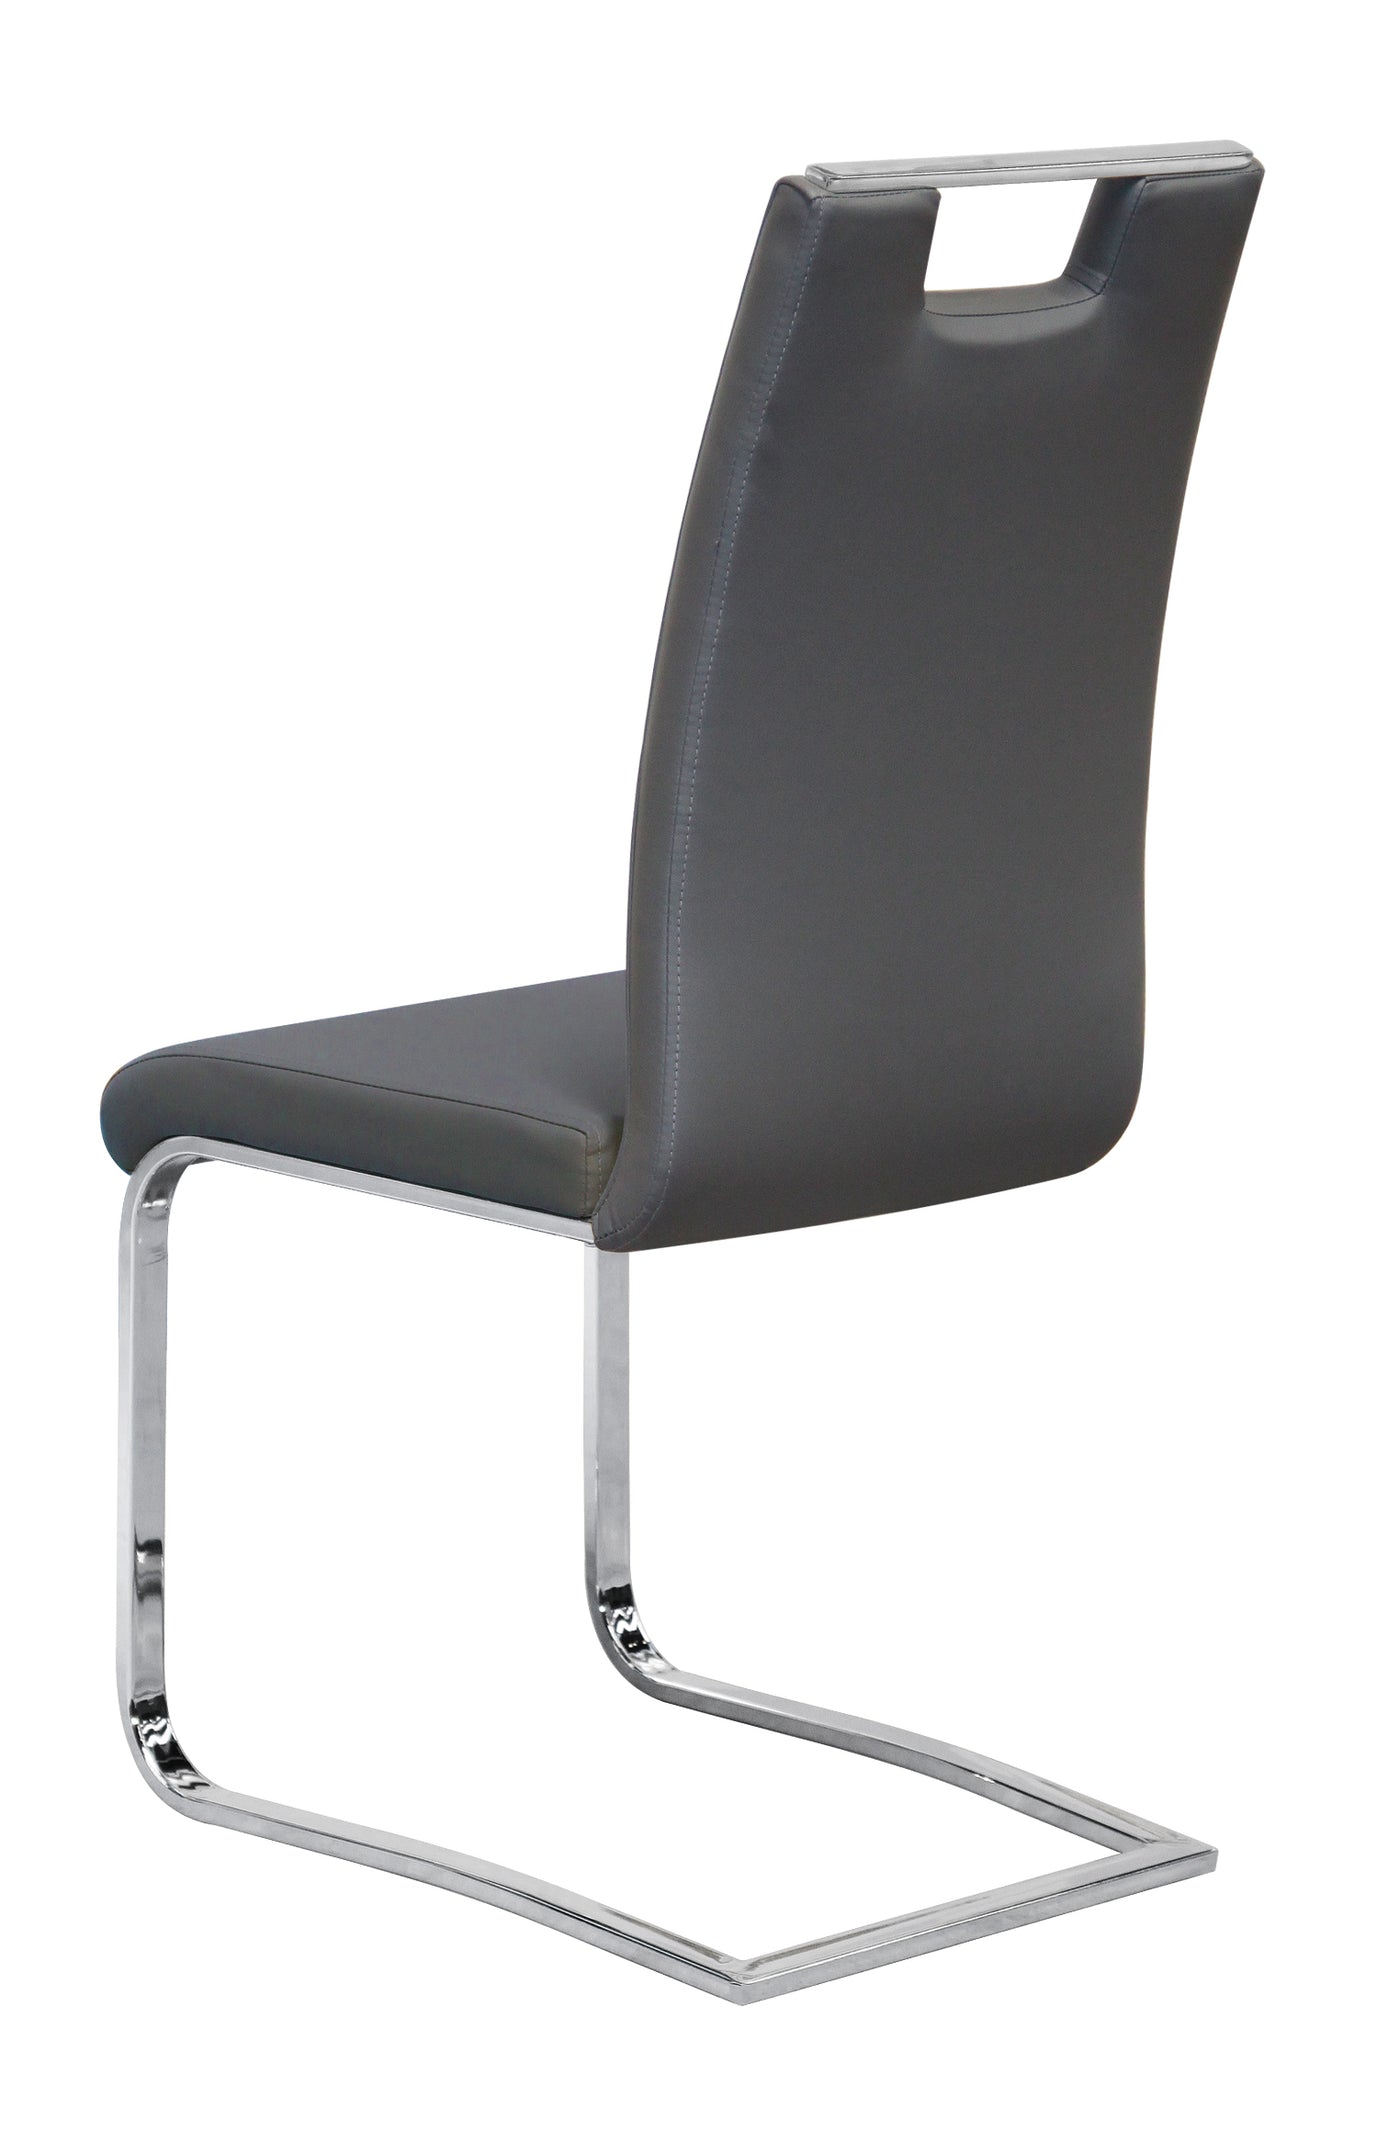 Rory Side Chair - Grey, Chrome